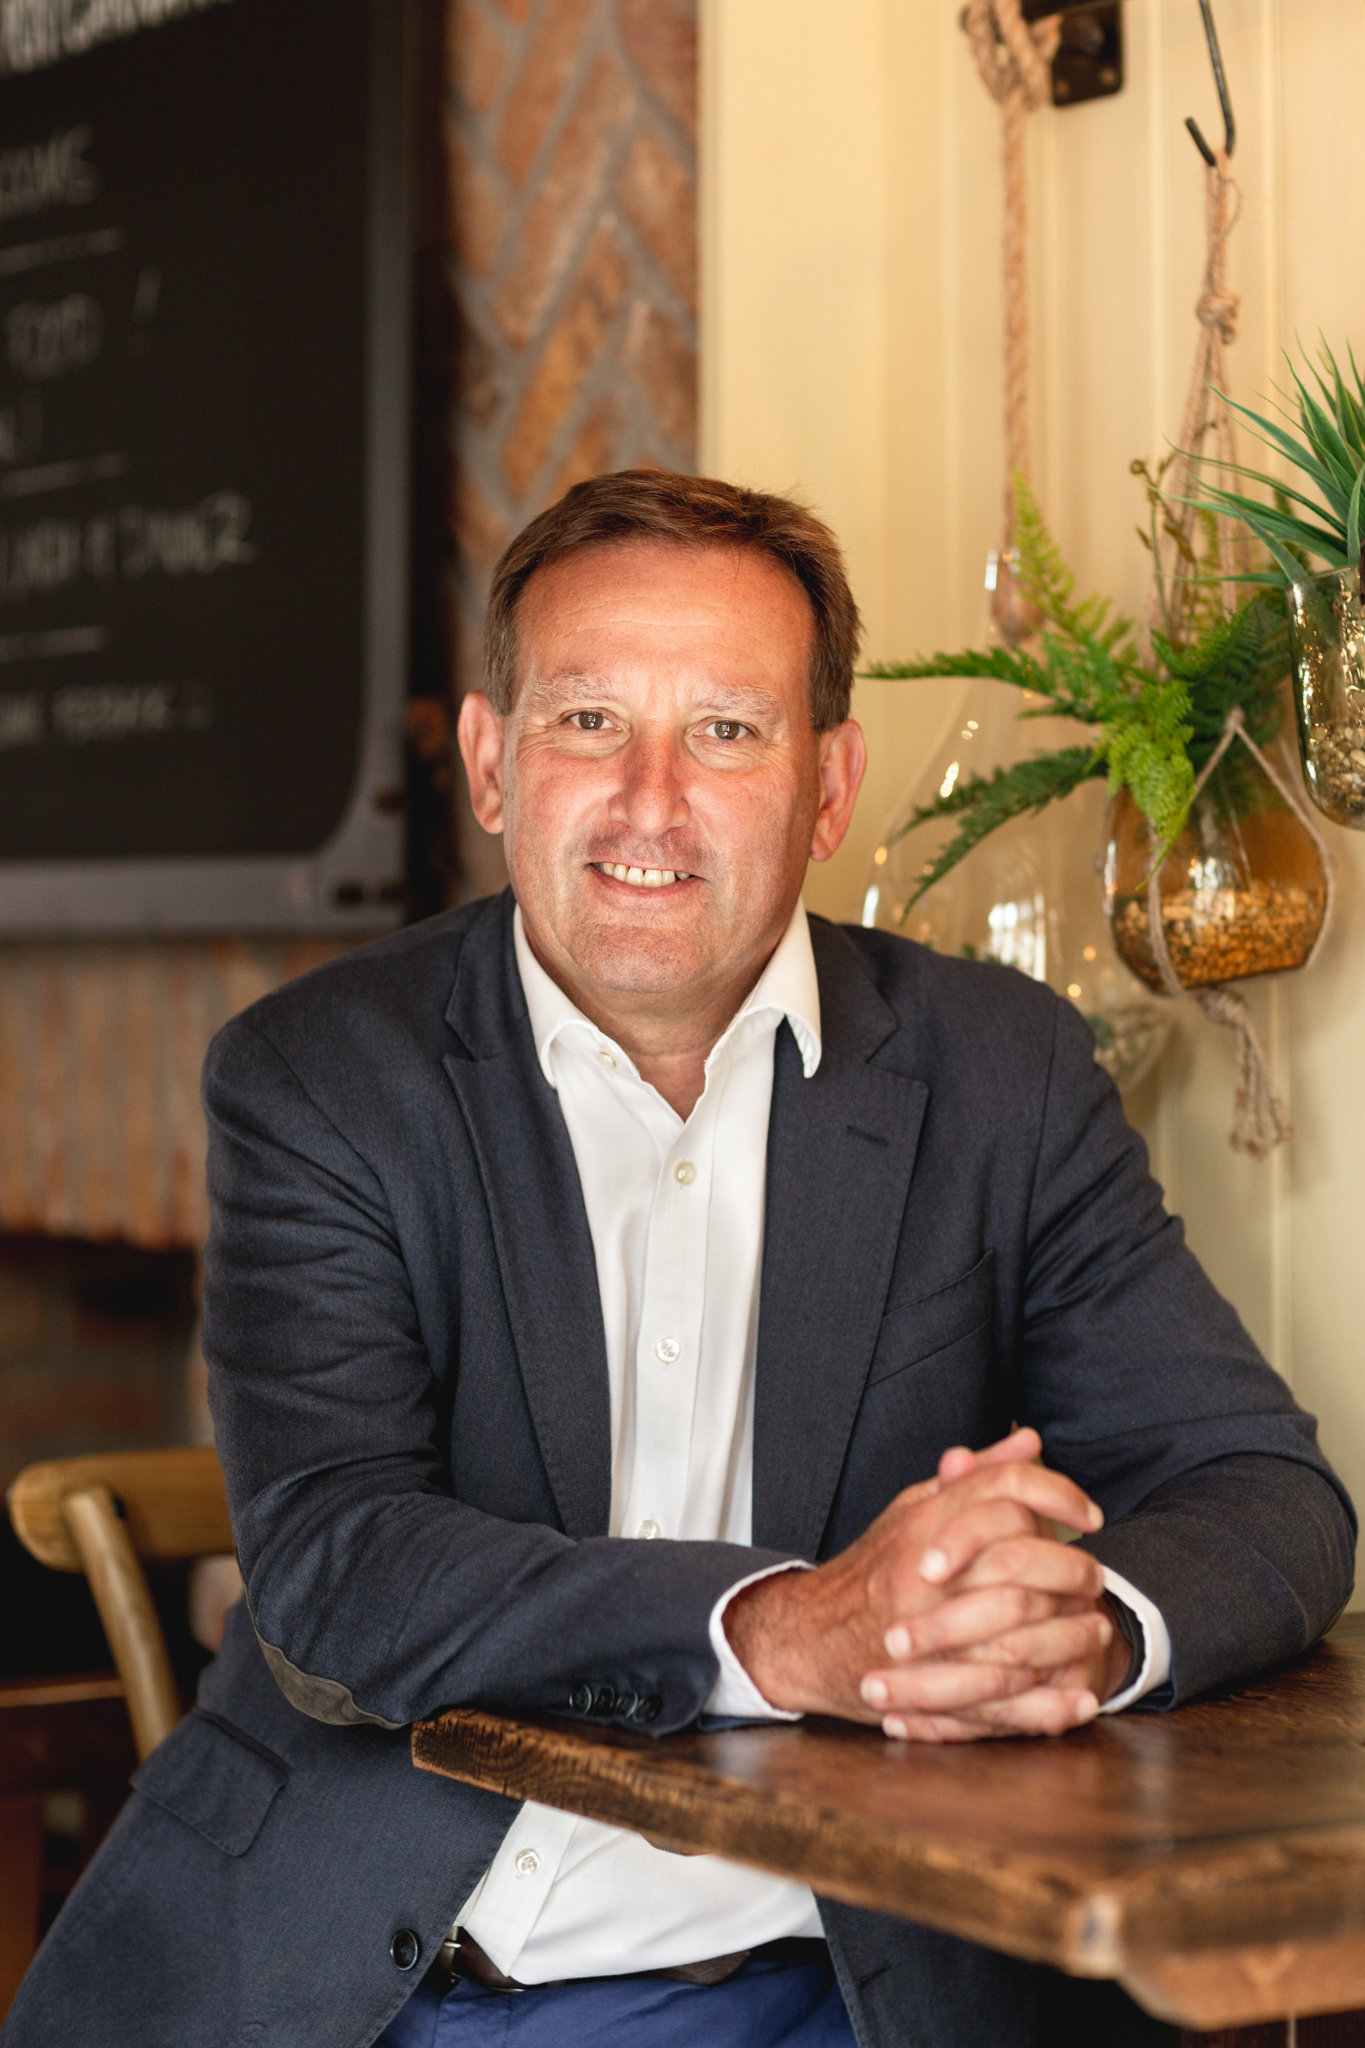 Clive Watson, Executive Chairman of City Pub Group